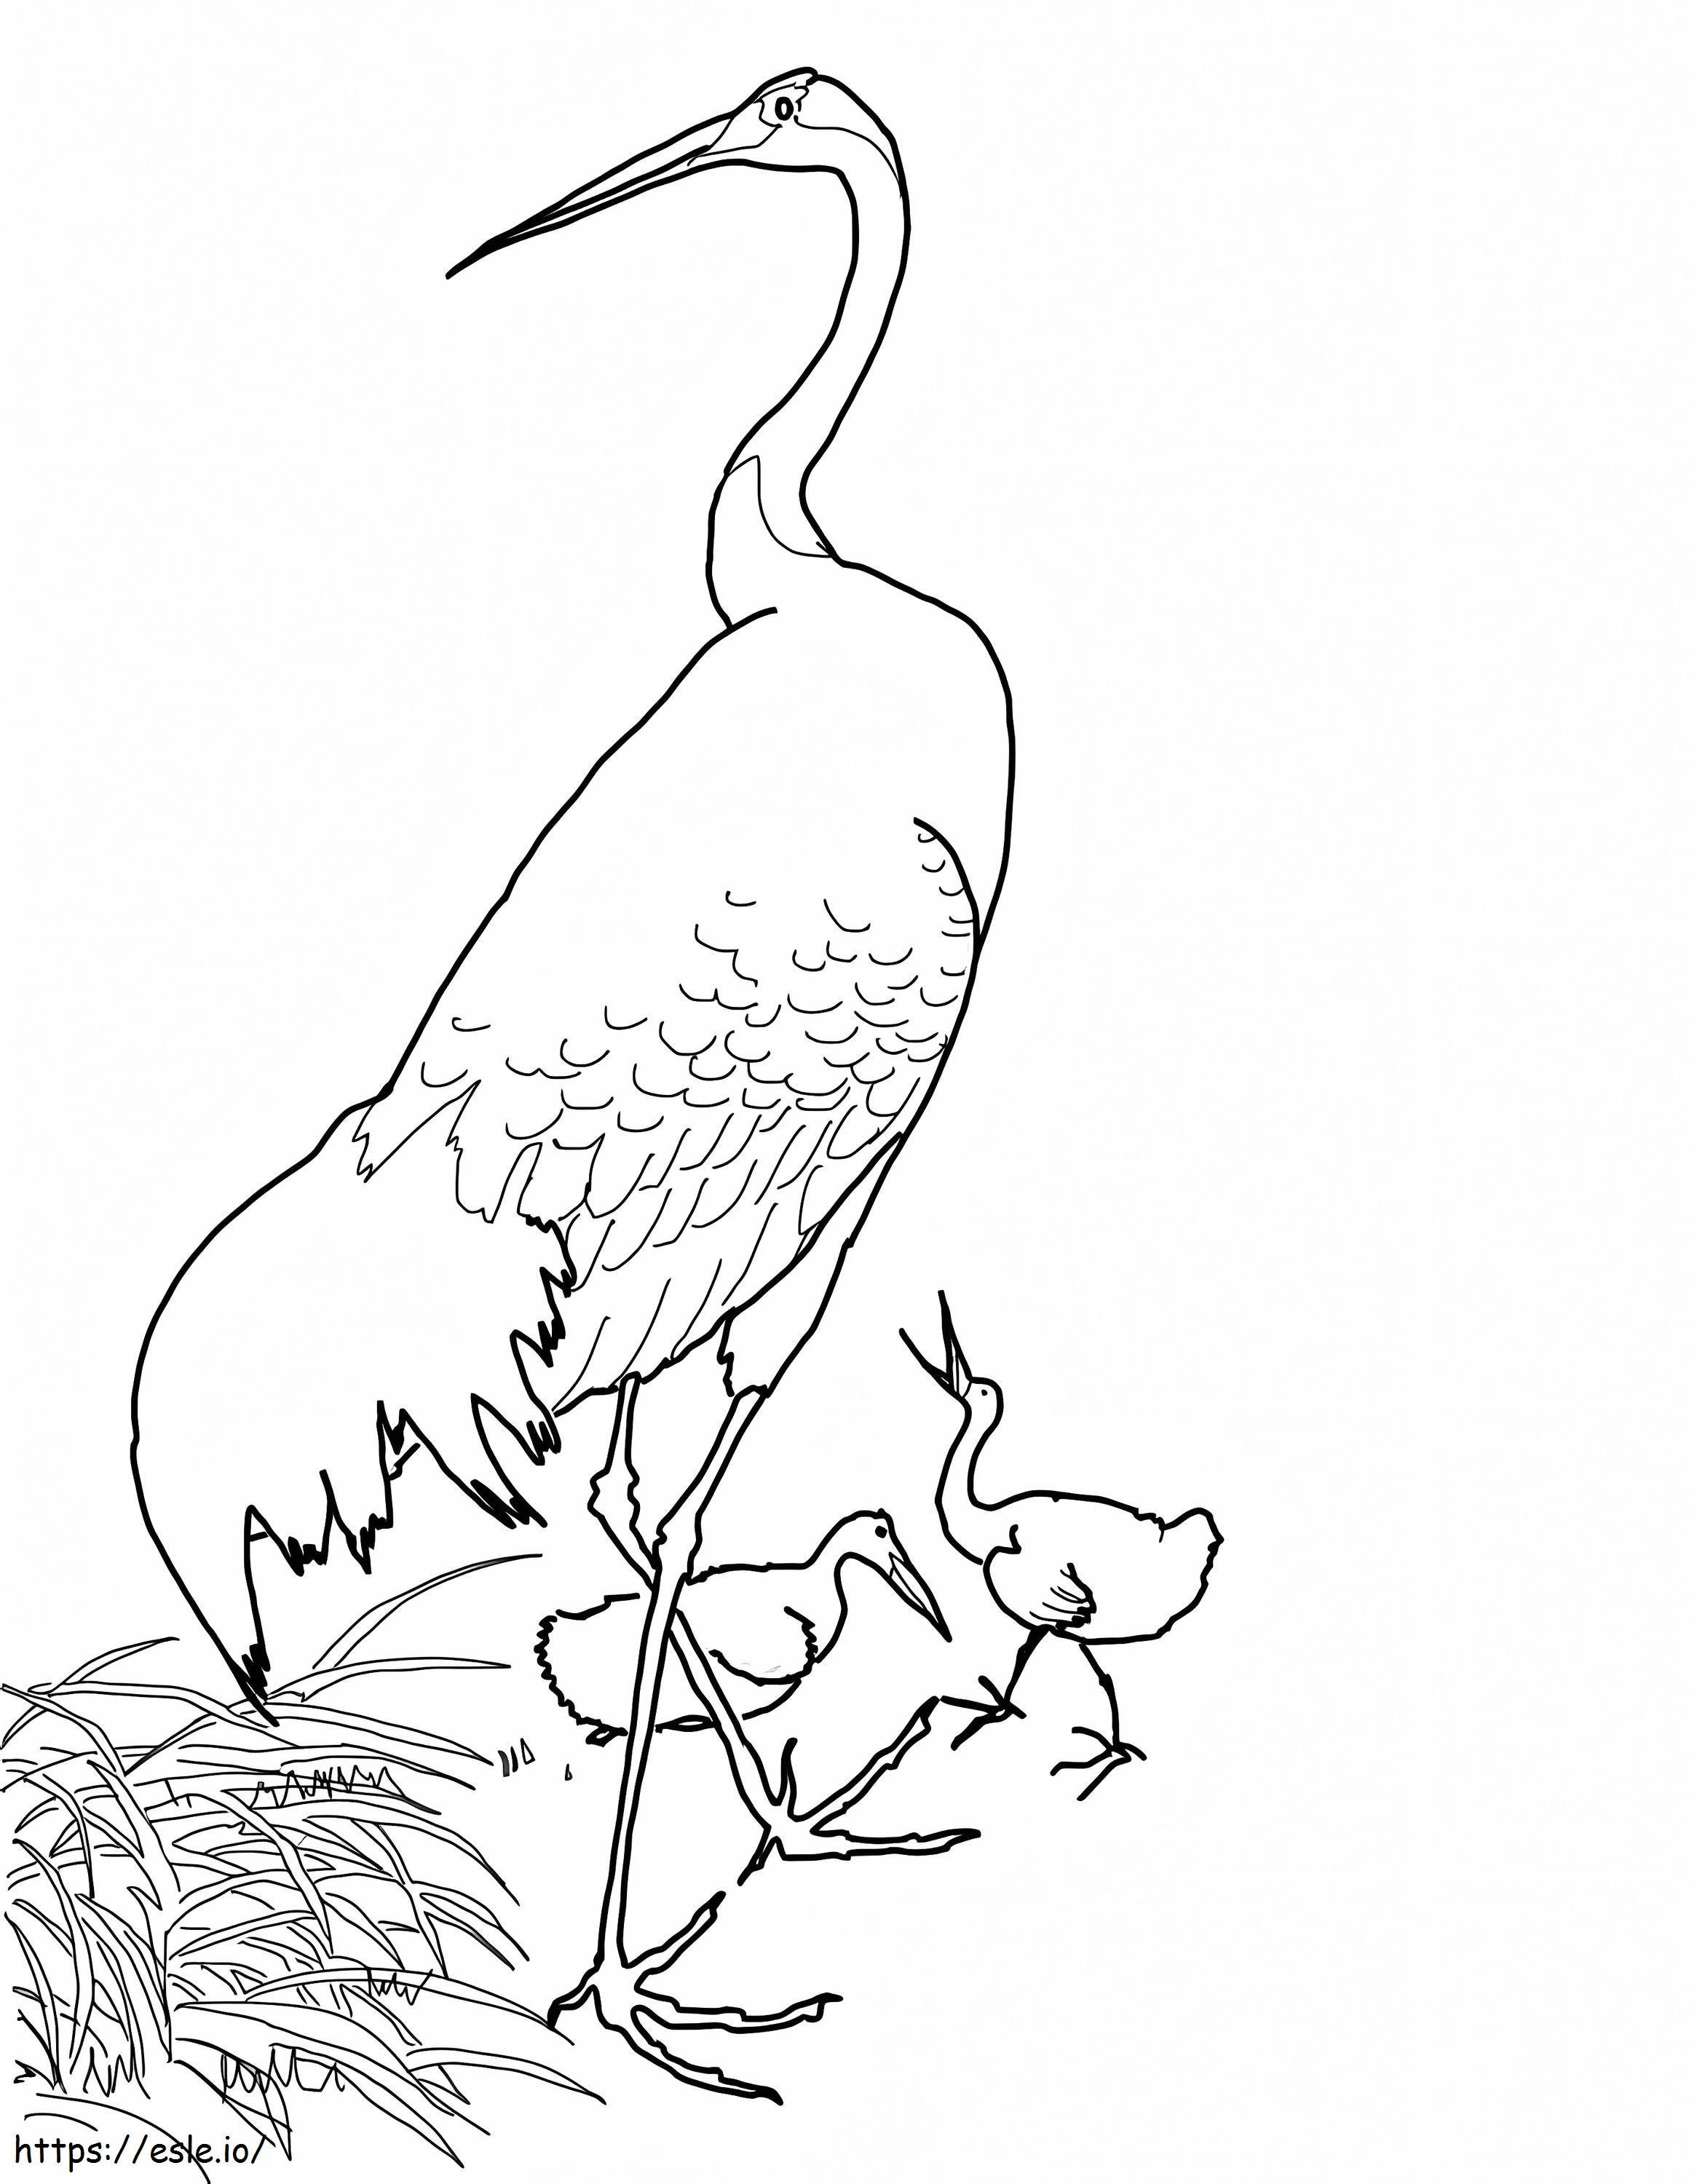 Japanese Crane coloring page